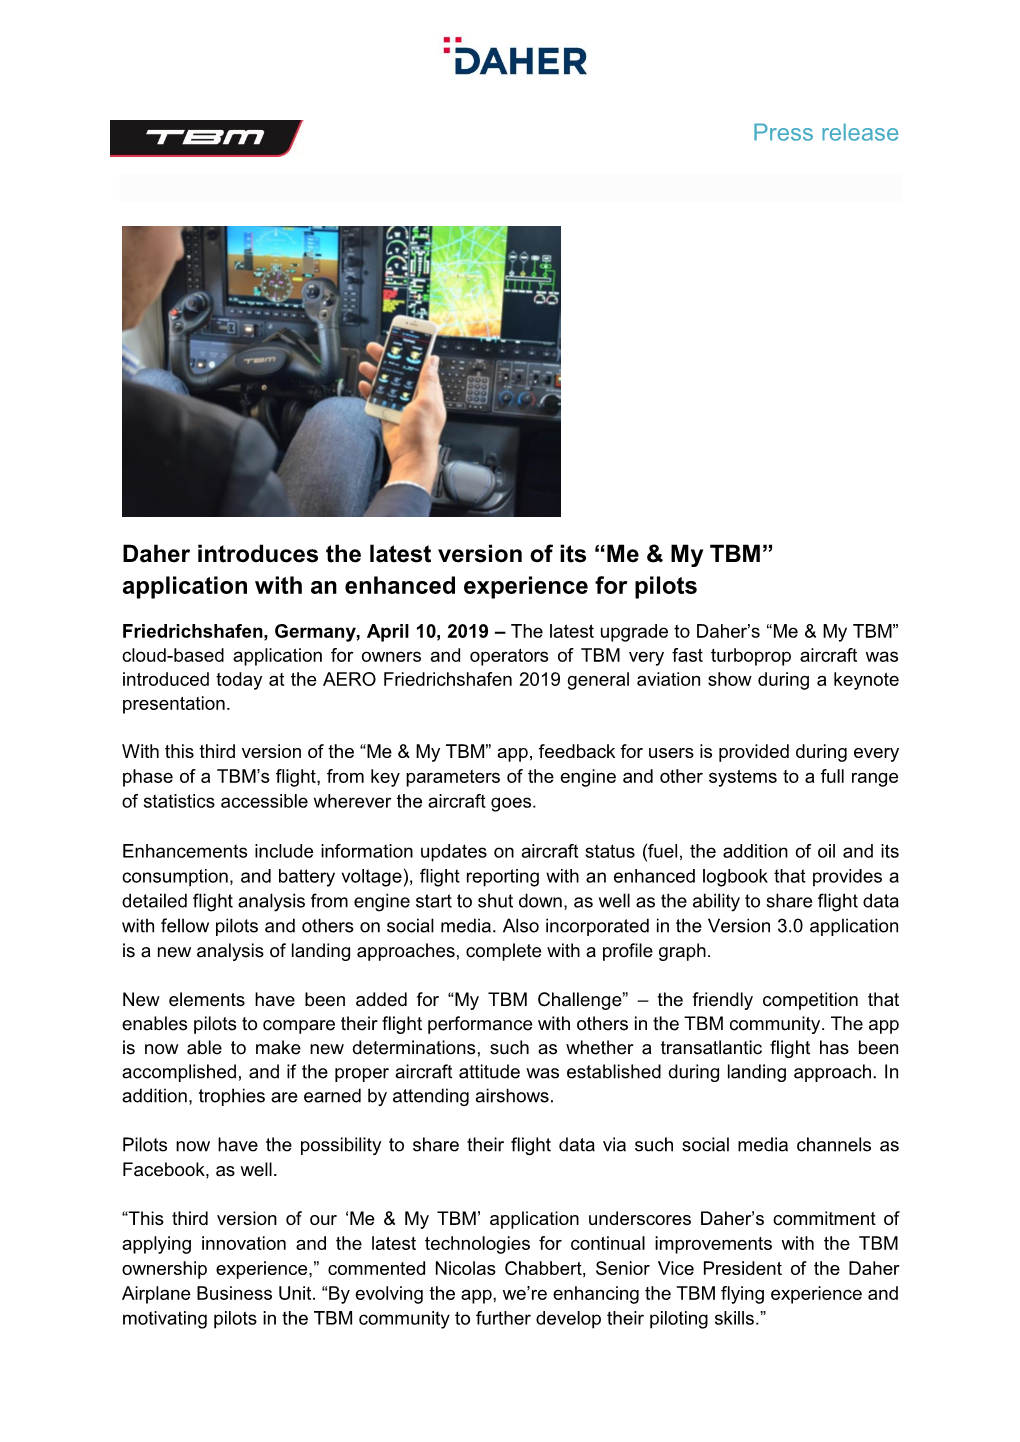 Press Release Daher Introduces the Latest Version of Its “Me & My TBM